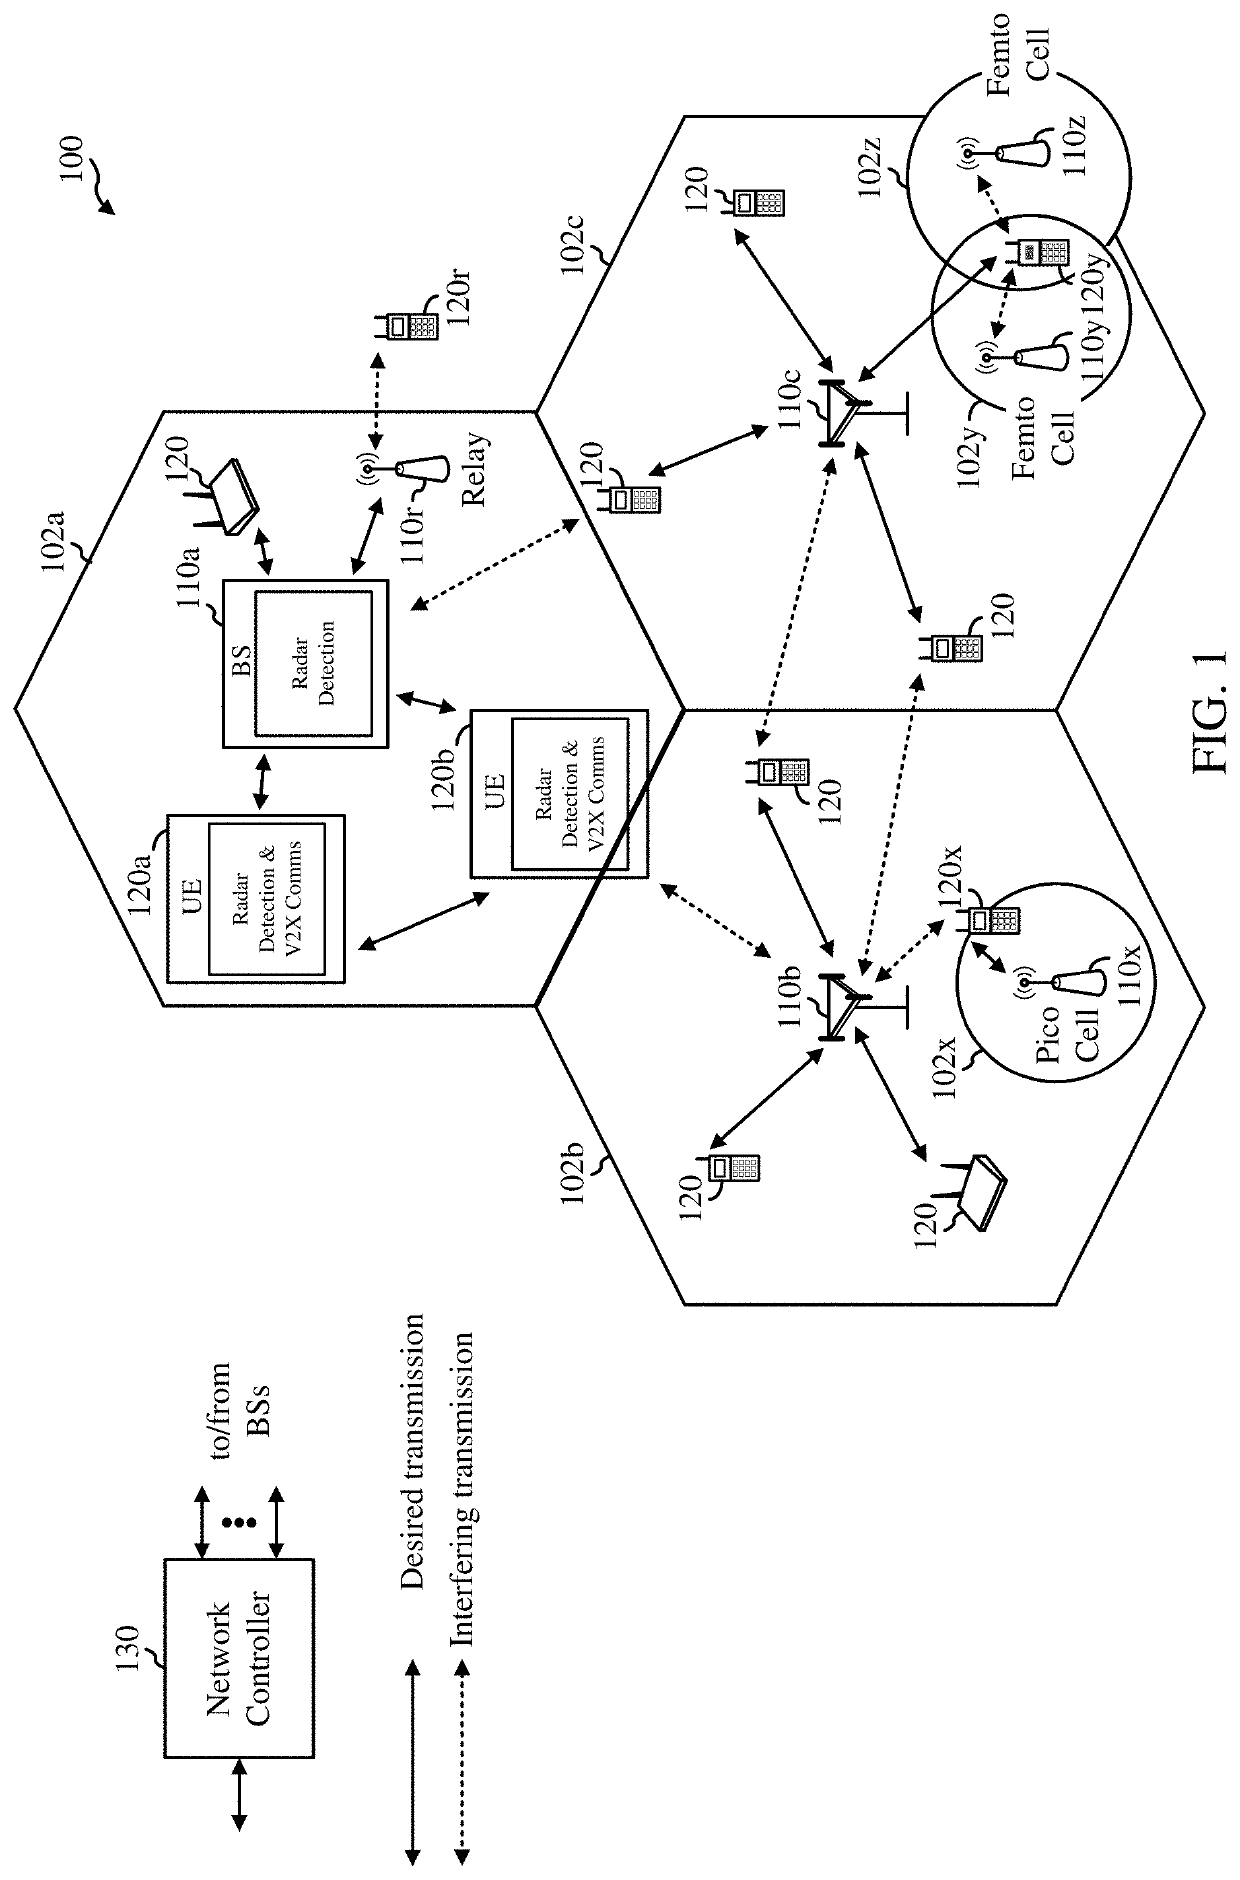 Multi-radar coexistence using slow rate interference identification and suppression